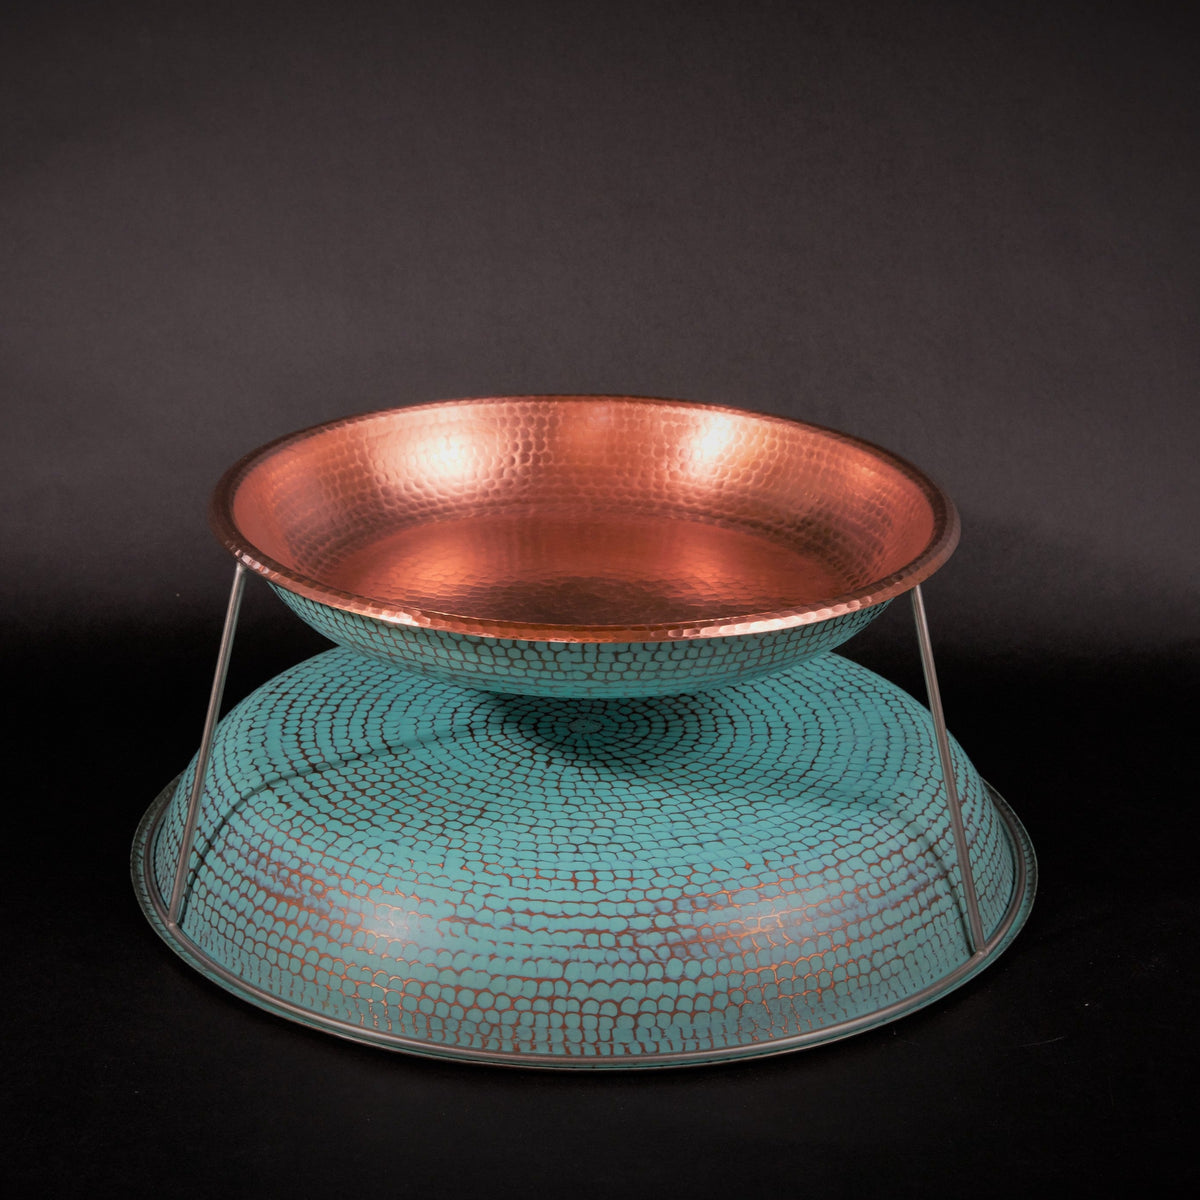 The Copper Verdigris Oyster Tray